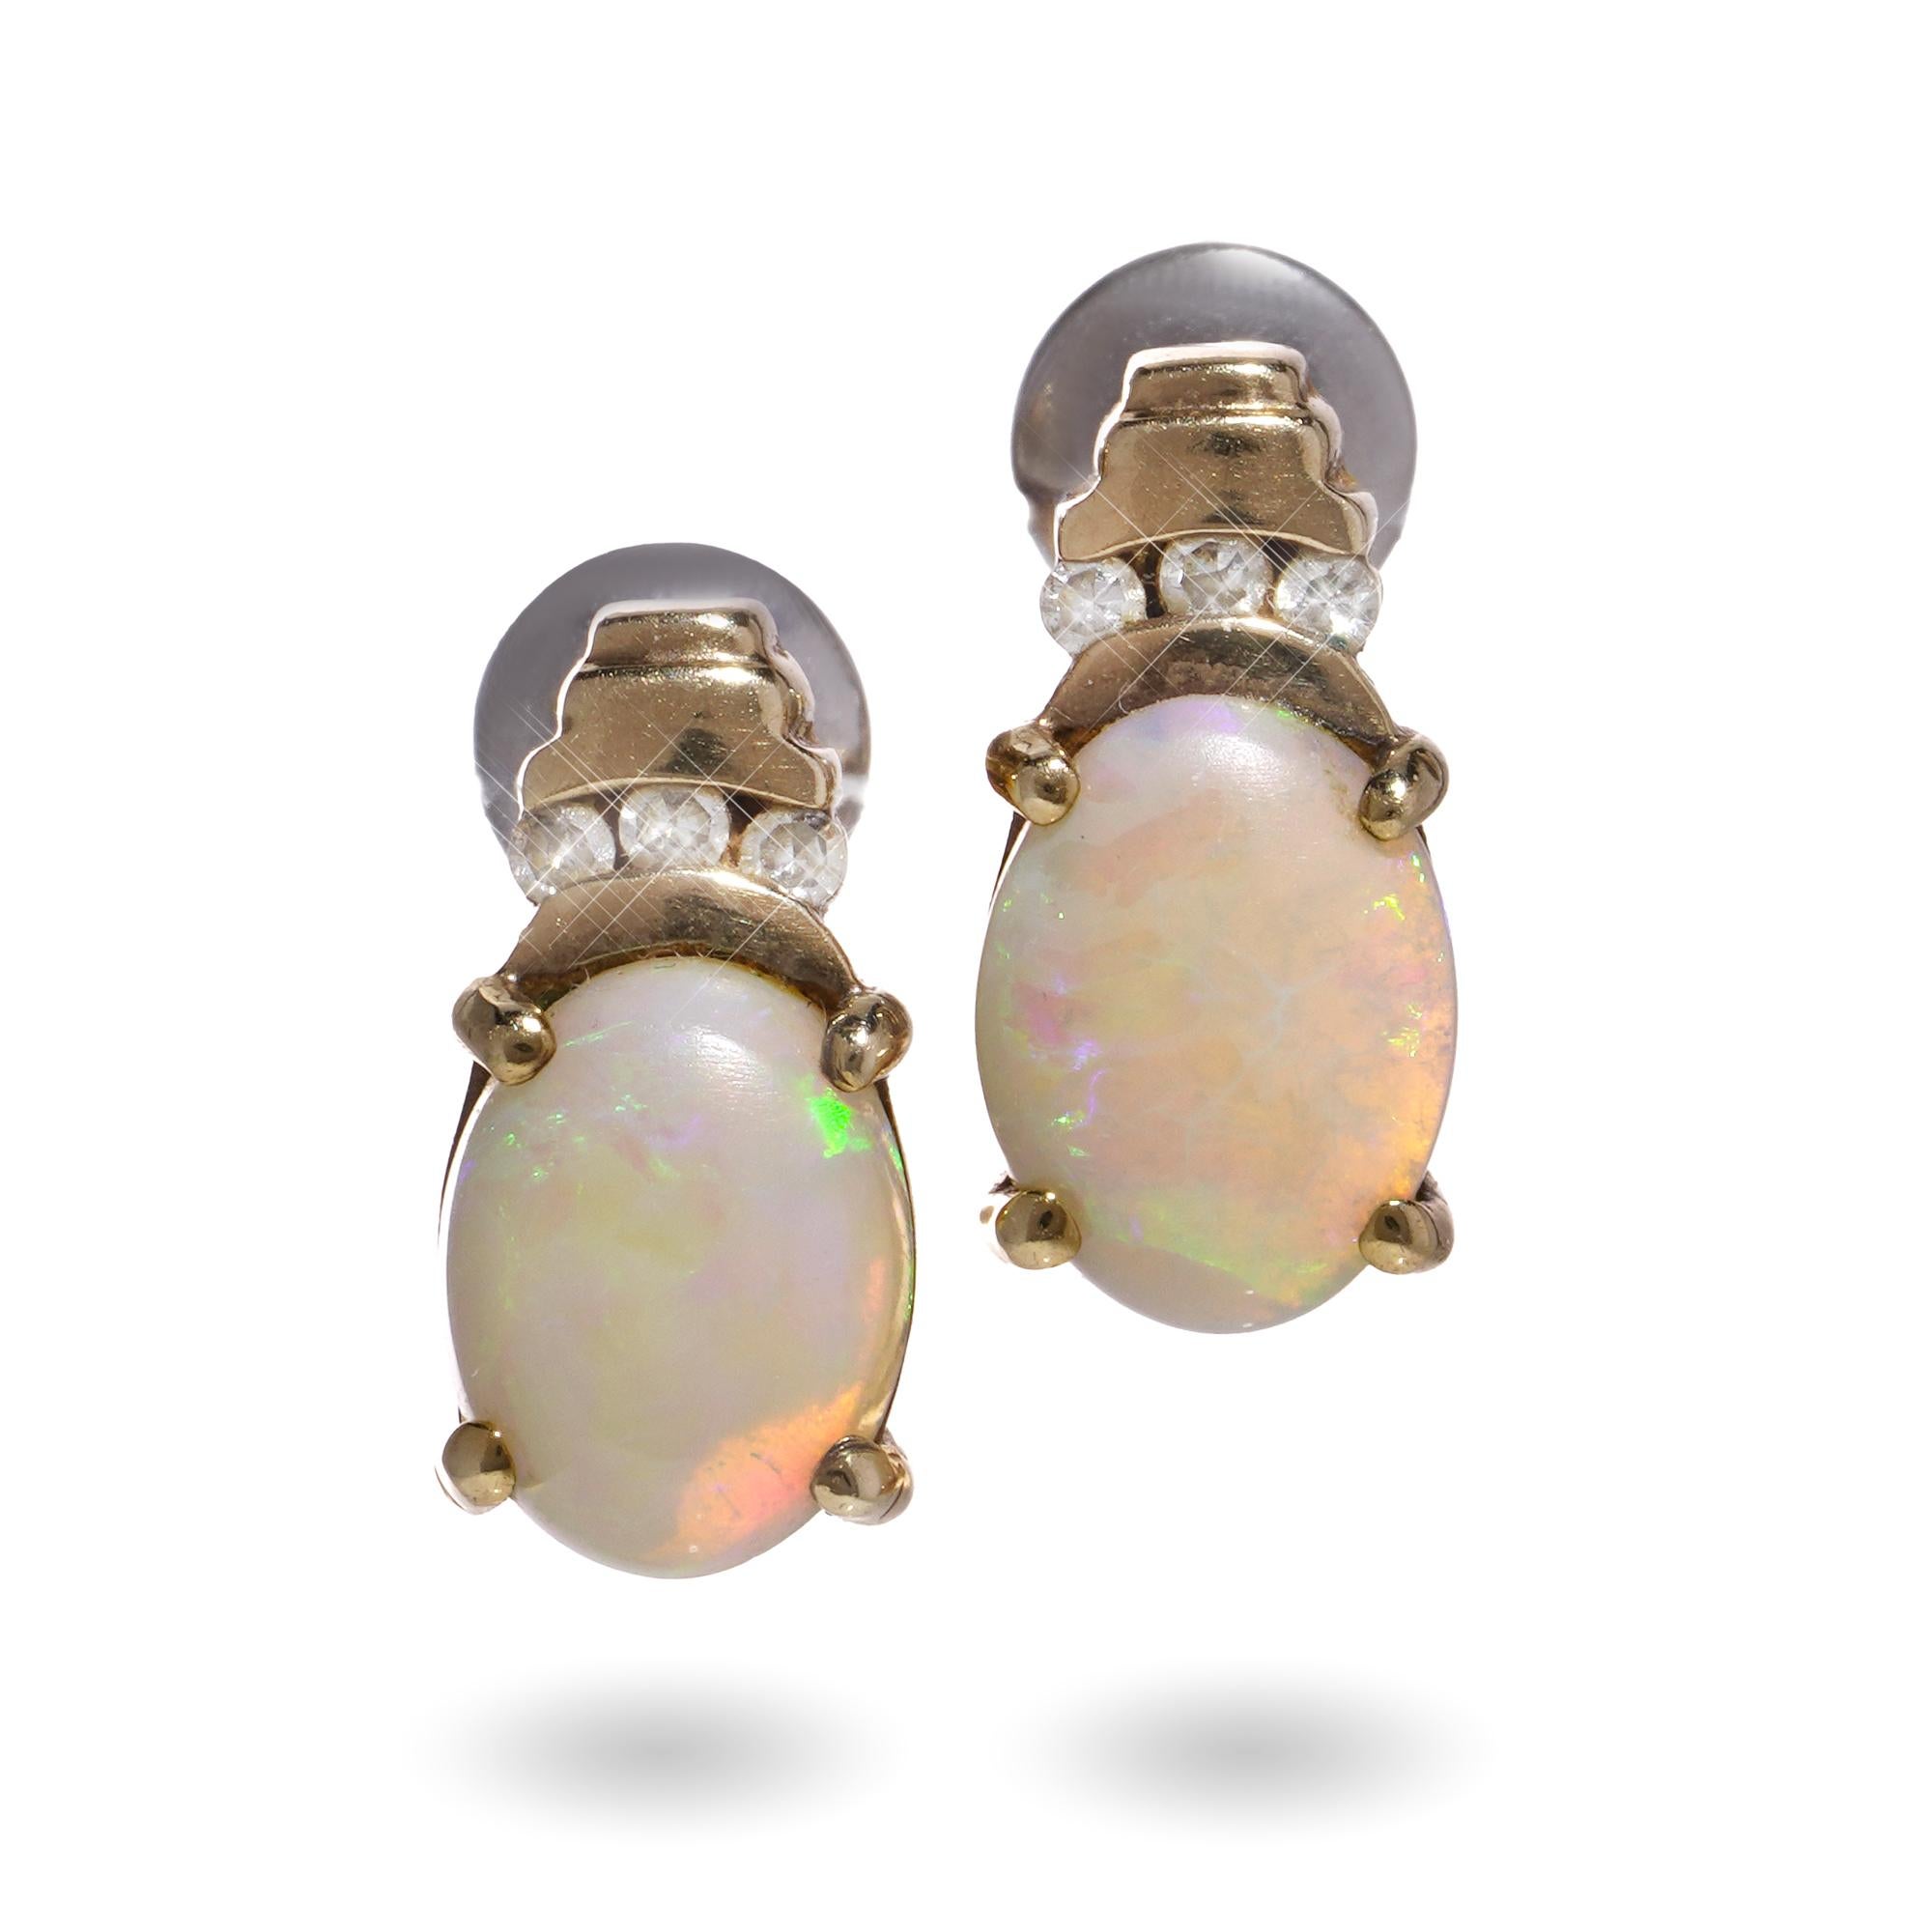 Vintage 9kt yellow gold pair of diamond and opal studs.
Made in 1988.

Dimensions -
Length: 1.3 cm x 0.6 cm
Weight: 3.00 grams

Diamonds -
Cut: Round brilliant
Quantity of stones: 6
Carat weight: 0.06 carats in total
Clarity: SI1
Colour: G - H

Each